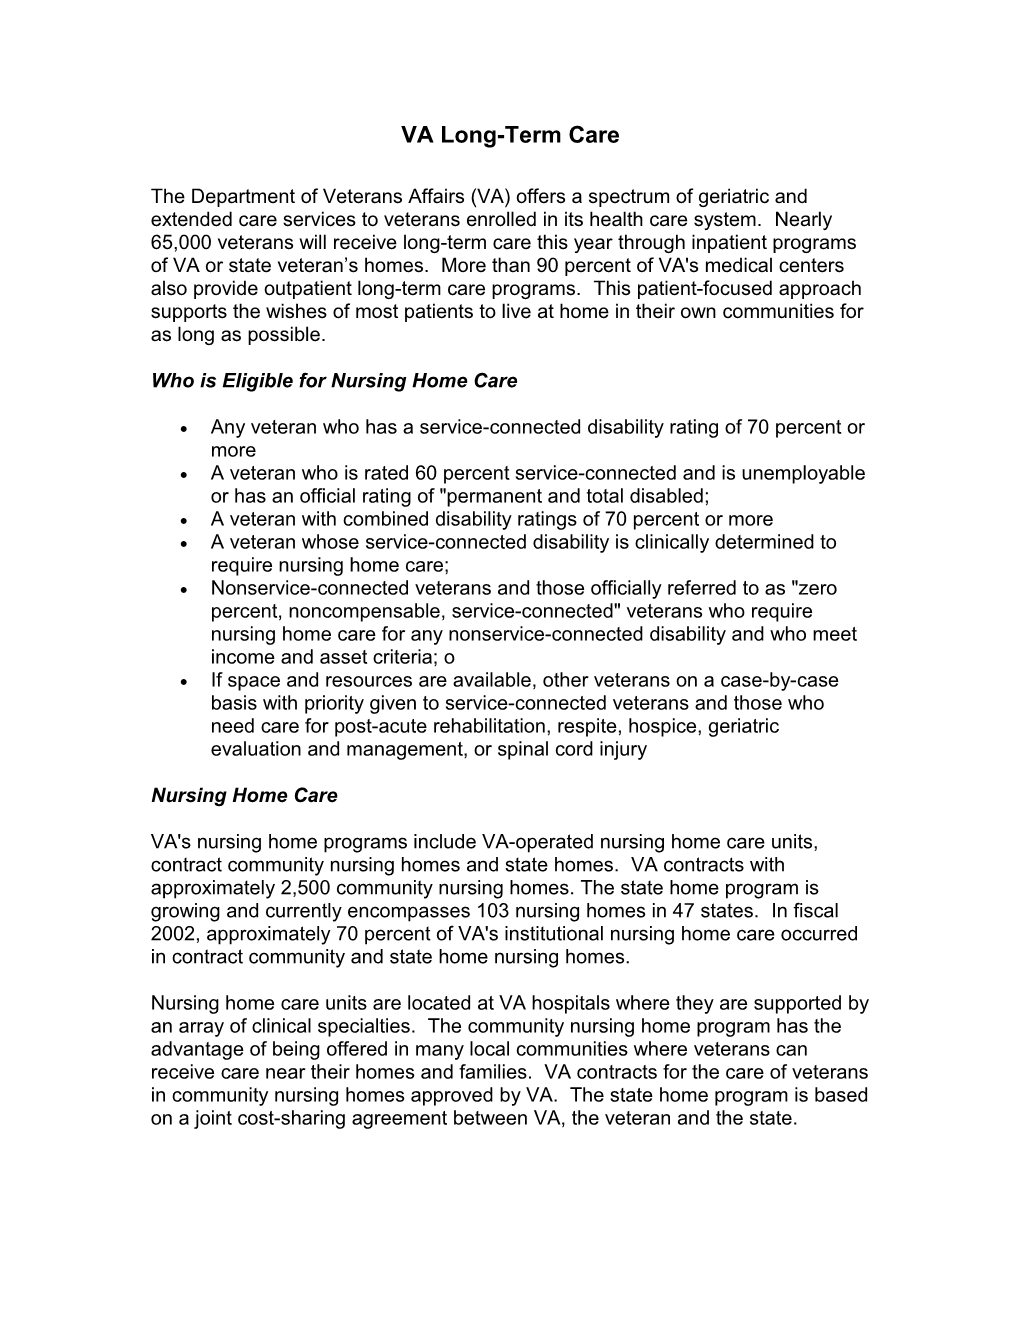 Who Is Eligible for Nursing Home Care